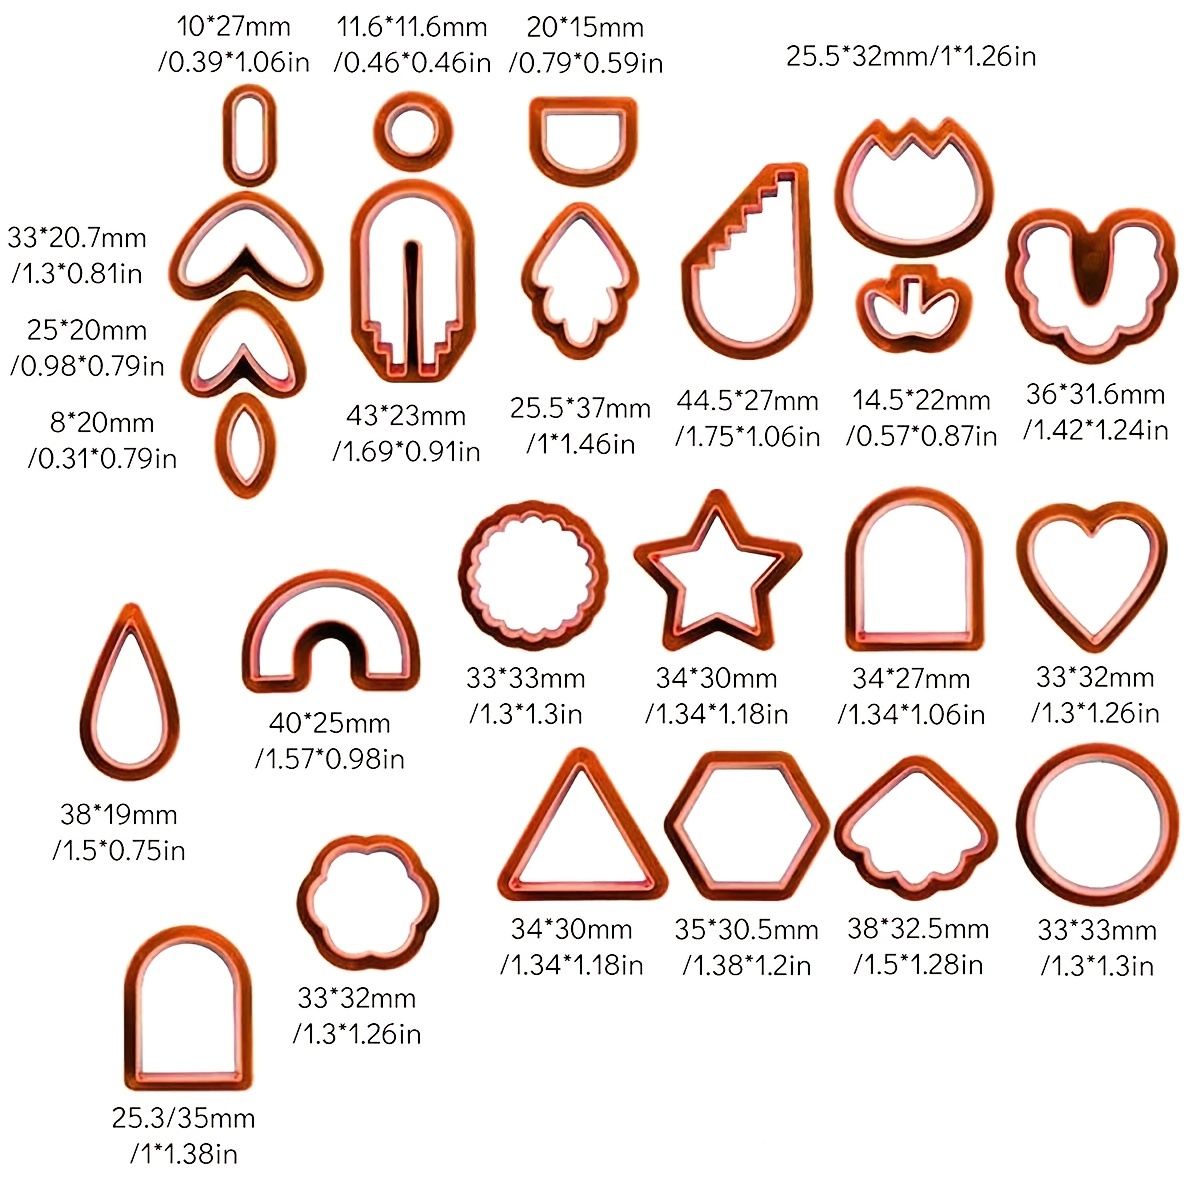 PTFJZ Polymer Clay Cutters for Earring Making - 160pcs Clay Tools Set with Earrings Accessories, 42+8pcs Different Shape Plastic Clay Molds Clay Cutters